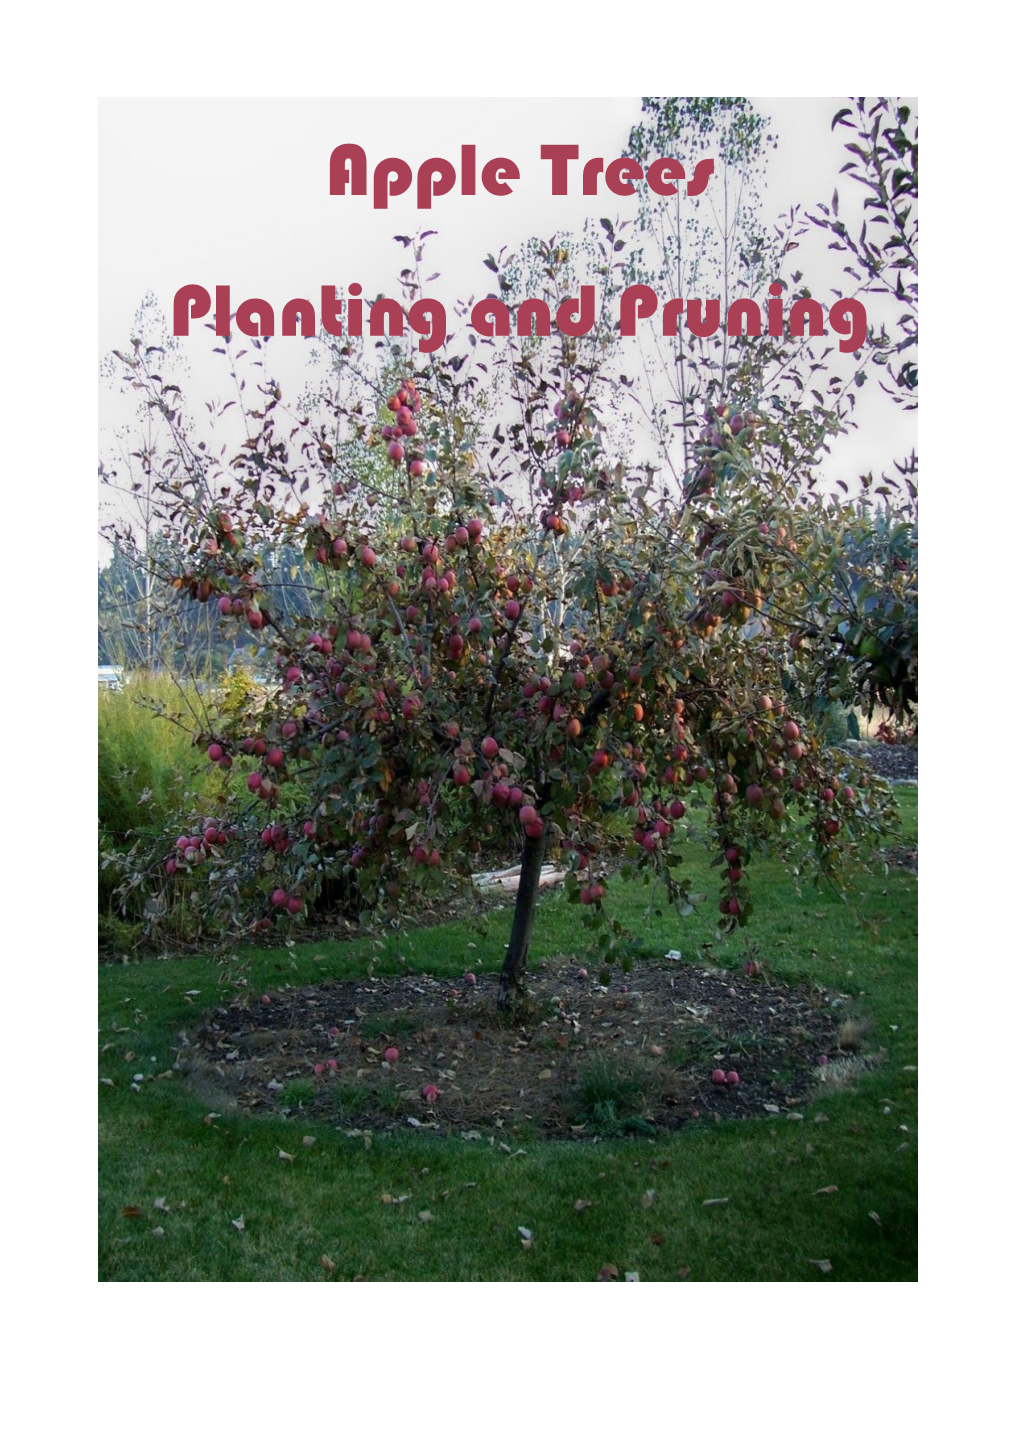 Apple Trees Planting and Pruning